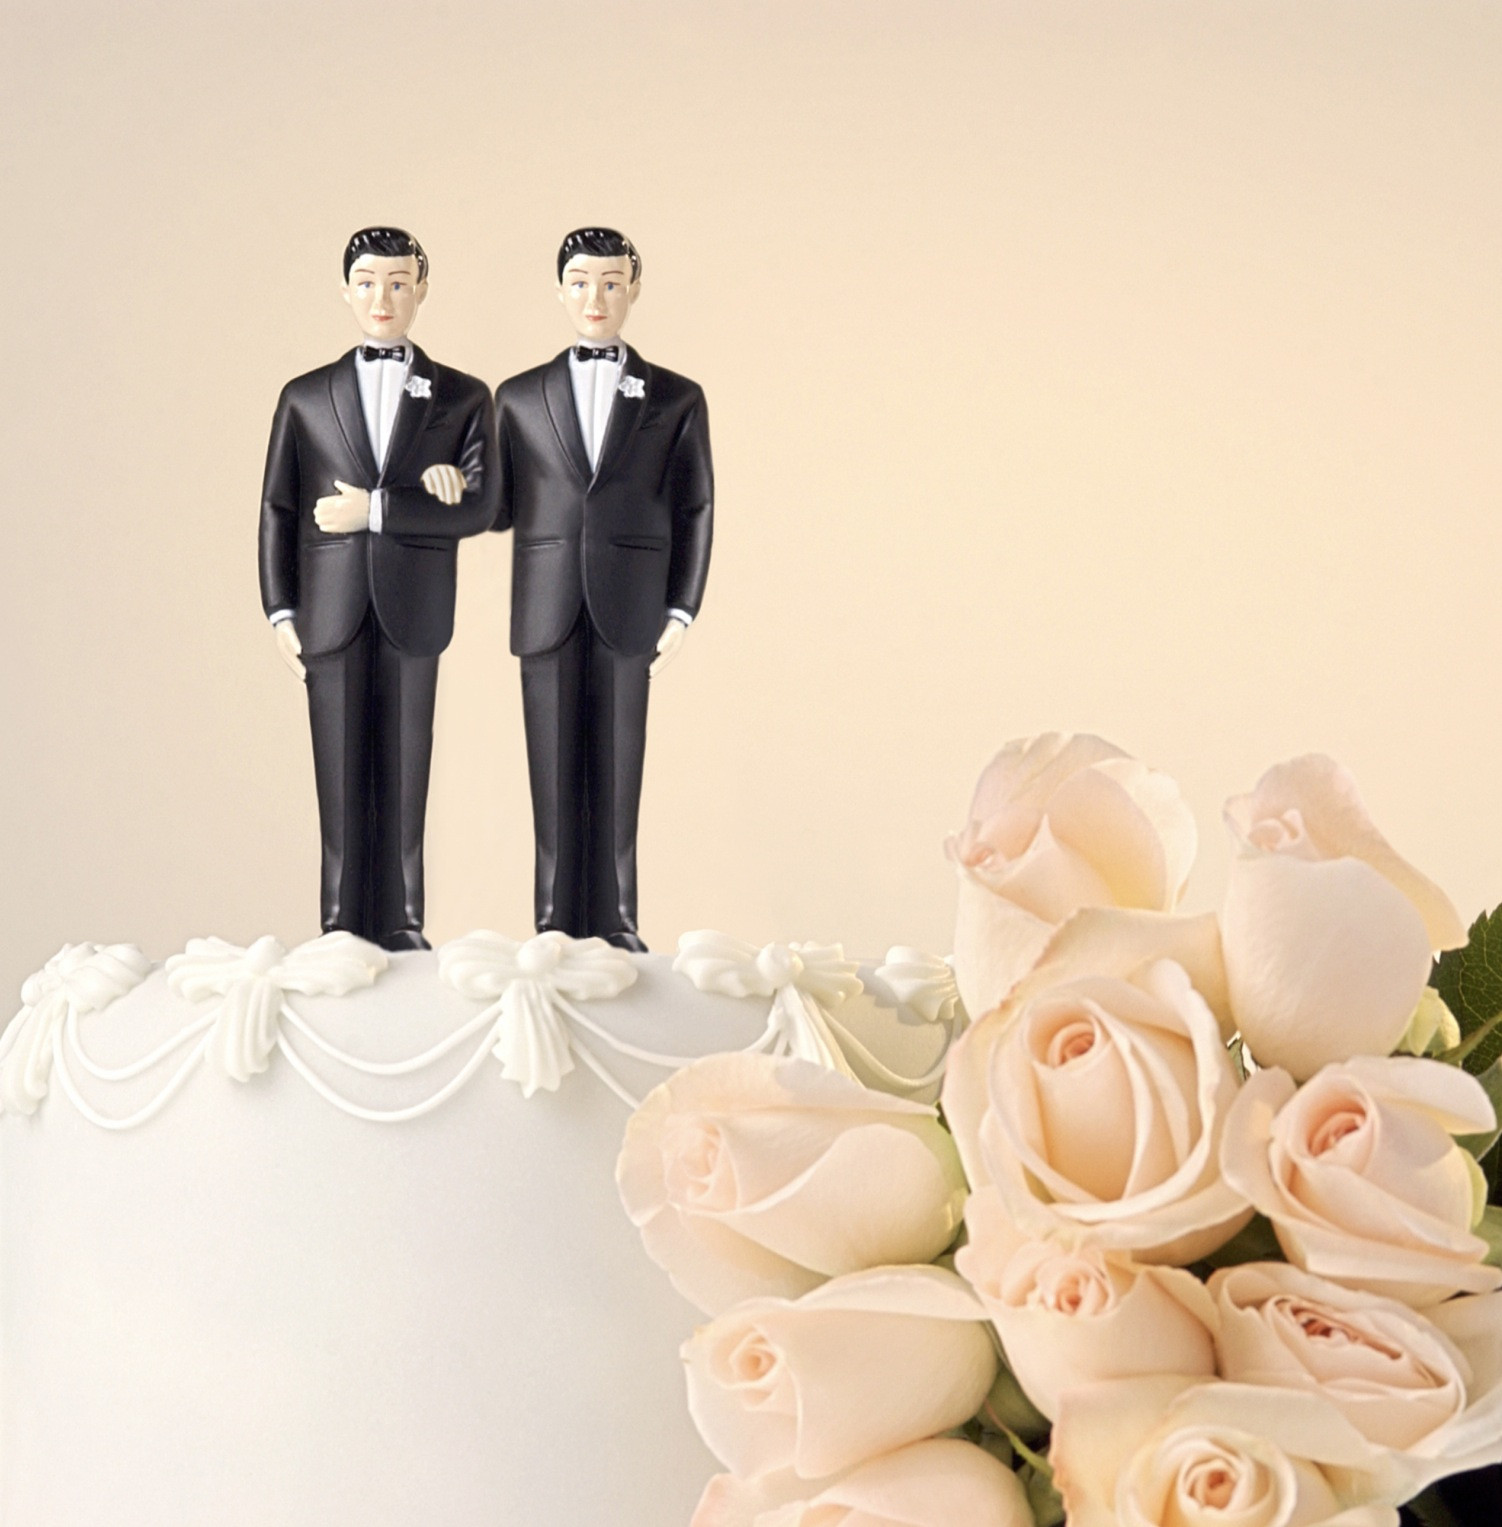 Gay Wedding Cakes Pictures
 Mayor Who Opposes Gay Marriage ficiates Son s Same